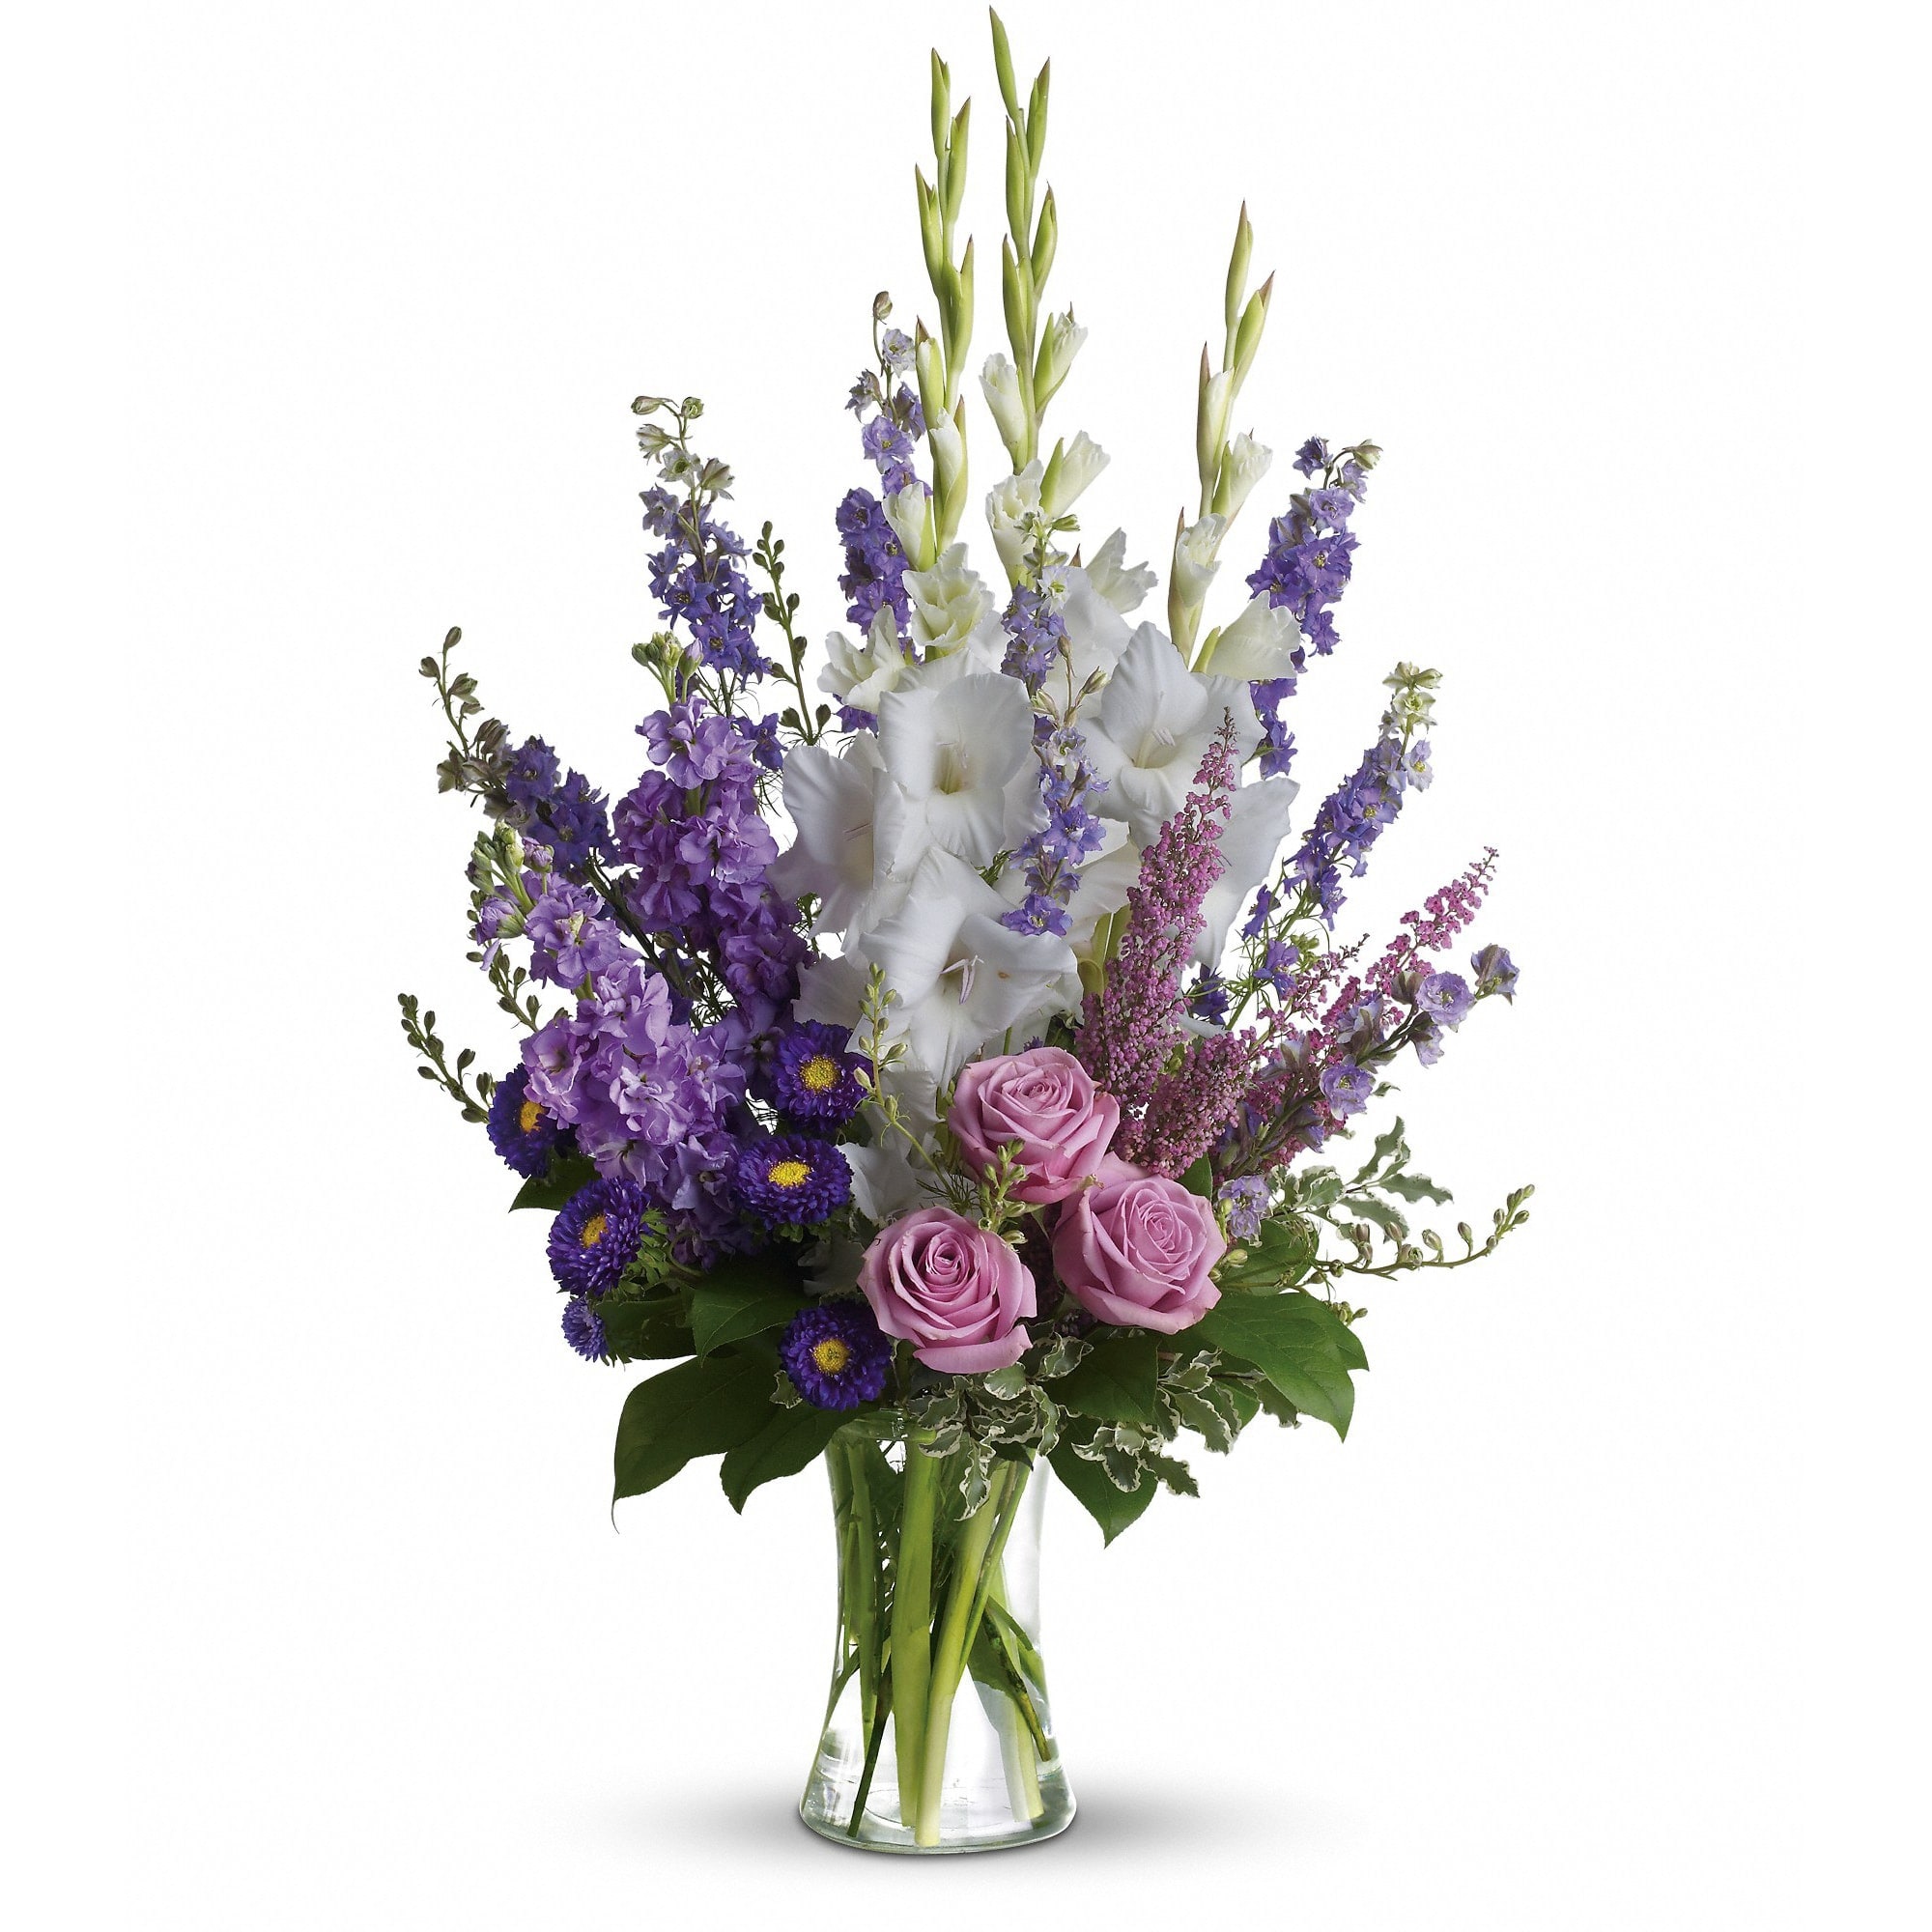 Joyful Memory by Teleflora - Lavender and white sympathy flowers make a grand statement in this joyful bouquet. Cherish your memories with this lasting remembrance of lavender larkspur and roses, deep purple asters, pure white gladioli and the softest pink heather. 